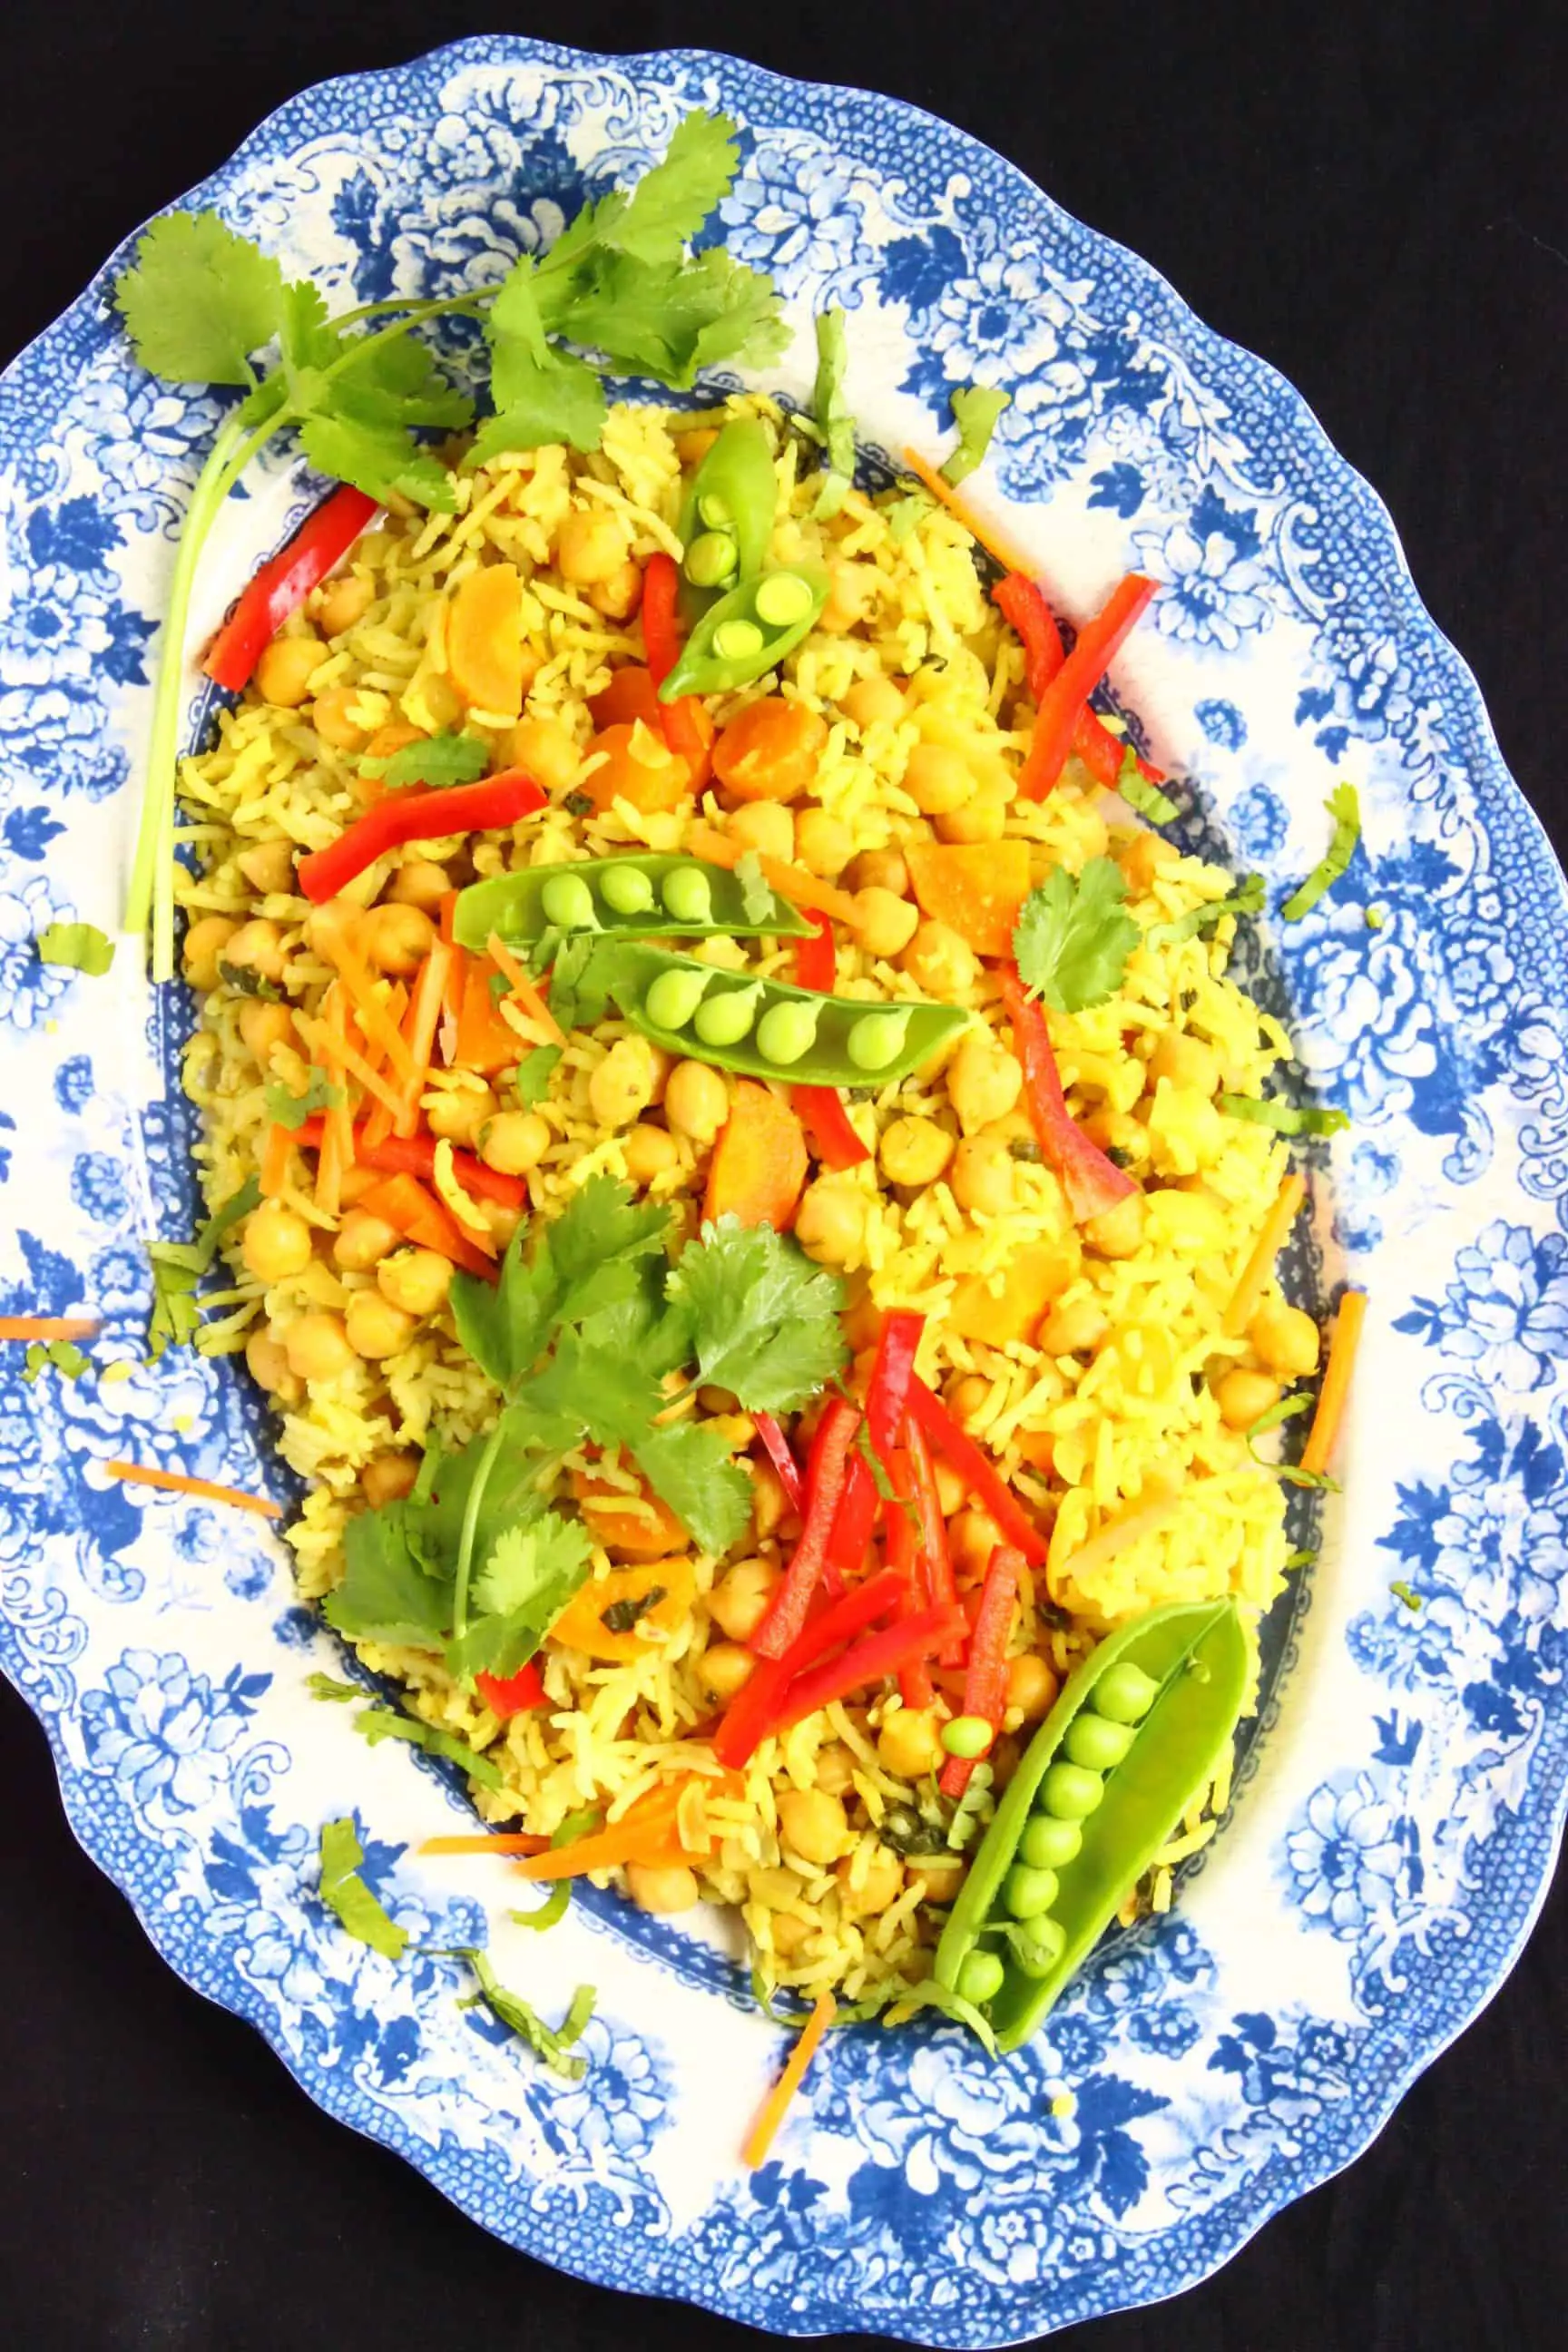 Yellow rice with green and red vegetables on a blue patterned plate against a black background